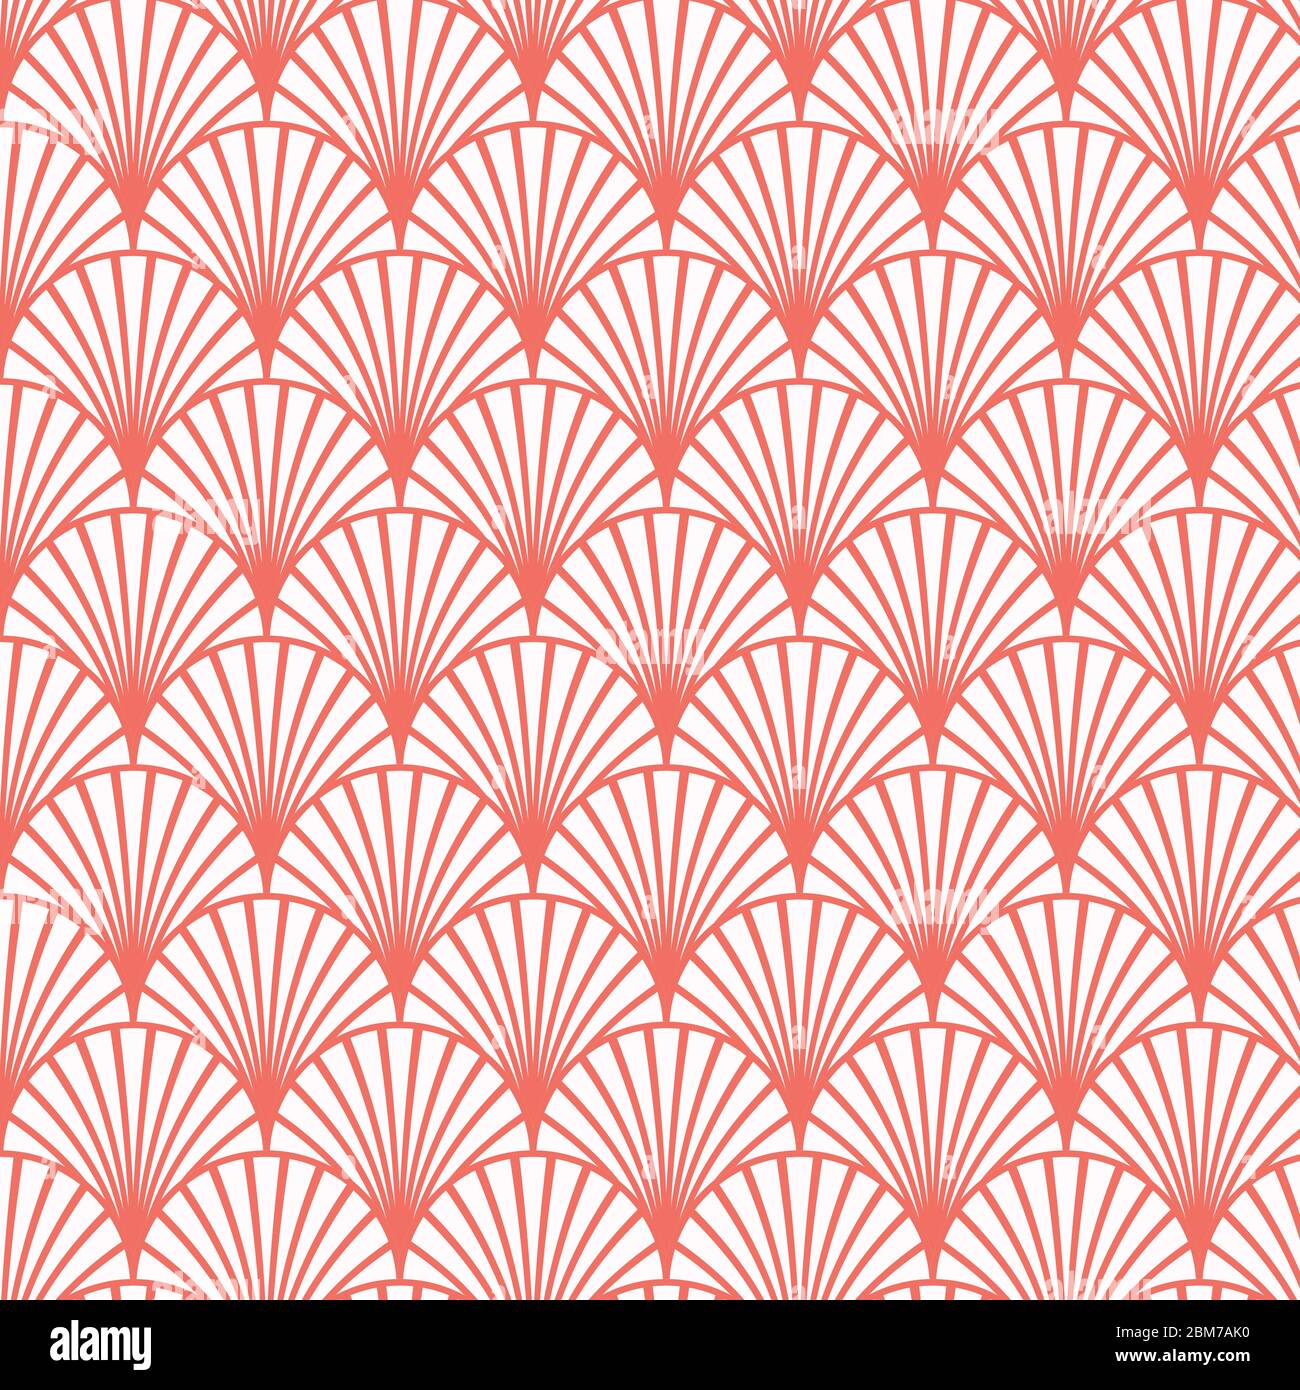 Vintage style elegant floral Art Deco Seamless Fan Pattern in living coral pink red color/retro texture vector pattern. Stock Vector